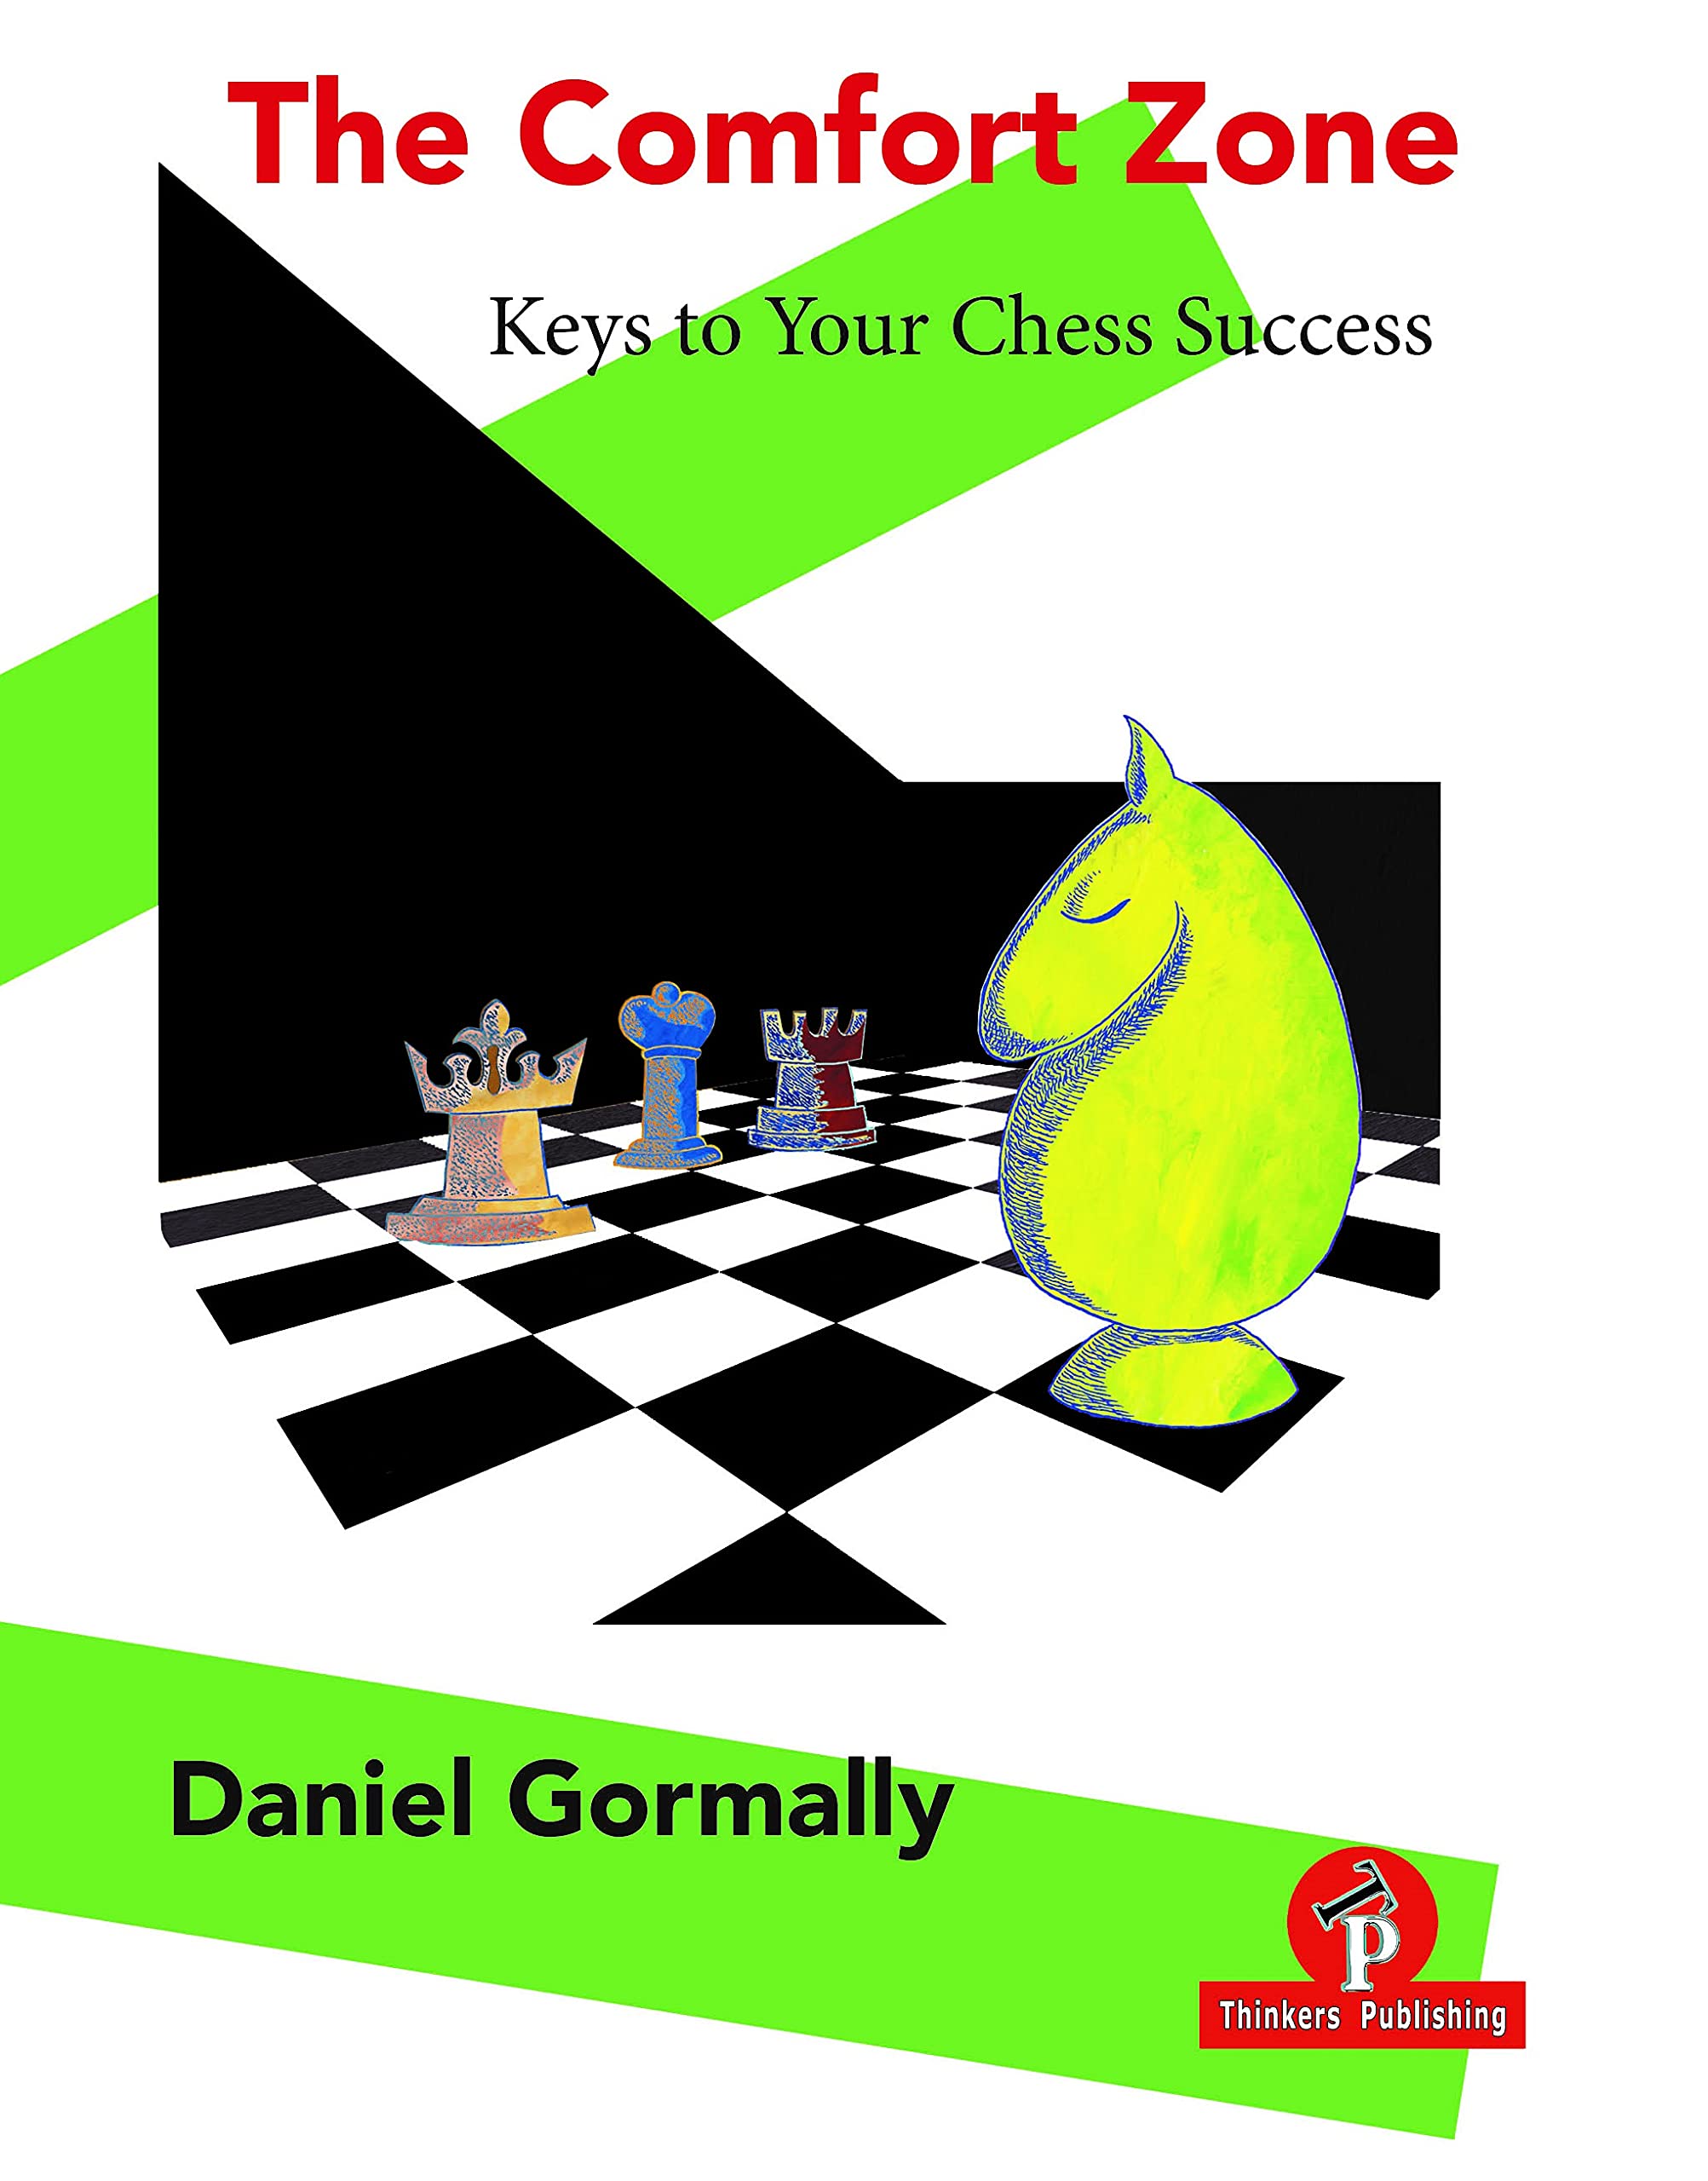 The Comfort Zone: Keys to Your Chess Success, Daniel Gormally, Thinkers Publishing, 19 July 2021, ISBN-13 ‏ : ‎ 978-9464201222